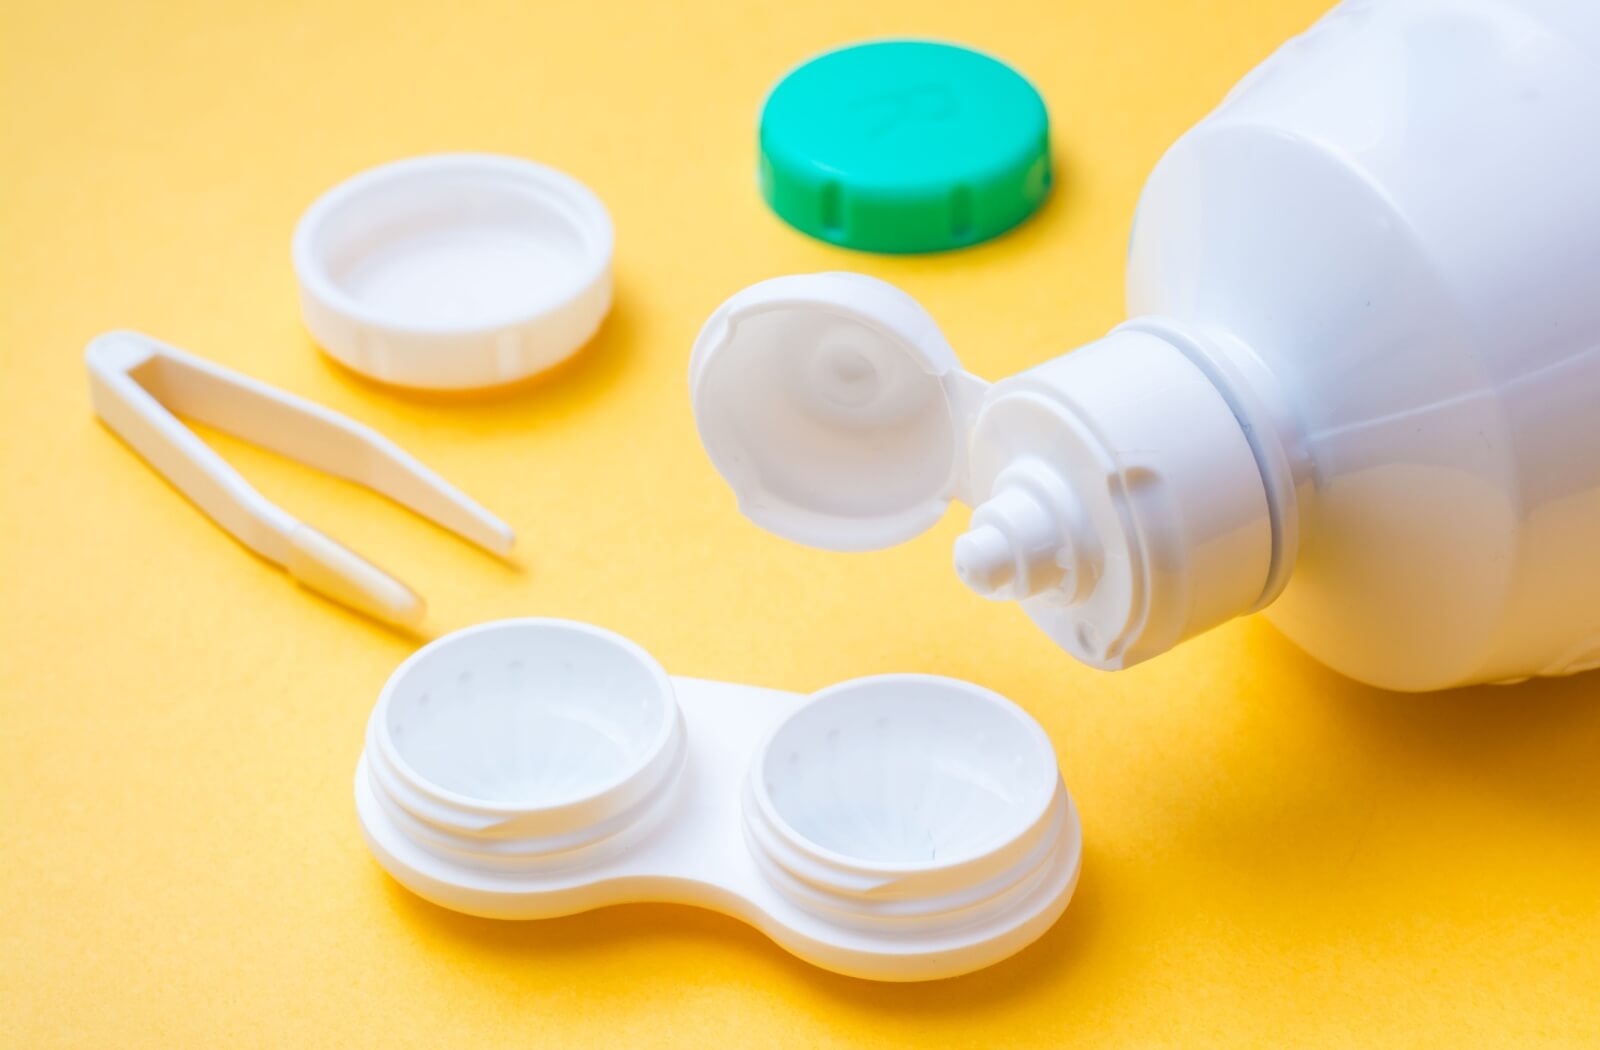 Contact lens cleaning solution being poured into a plastic container for contact lenses.